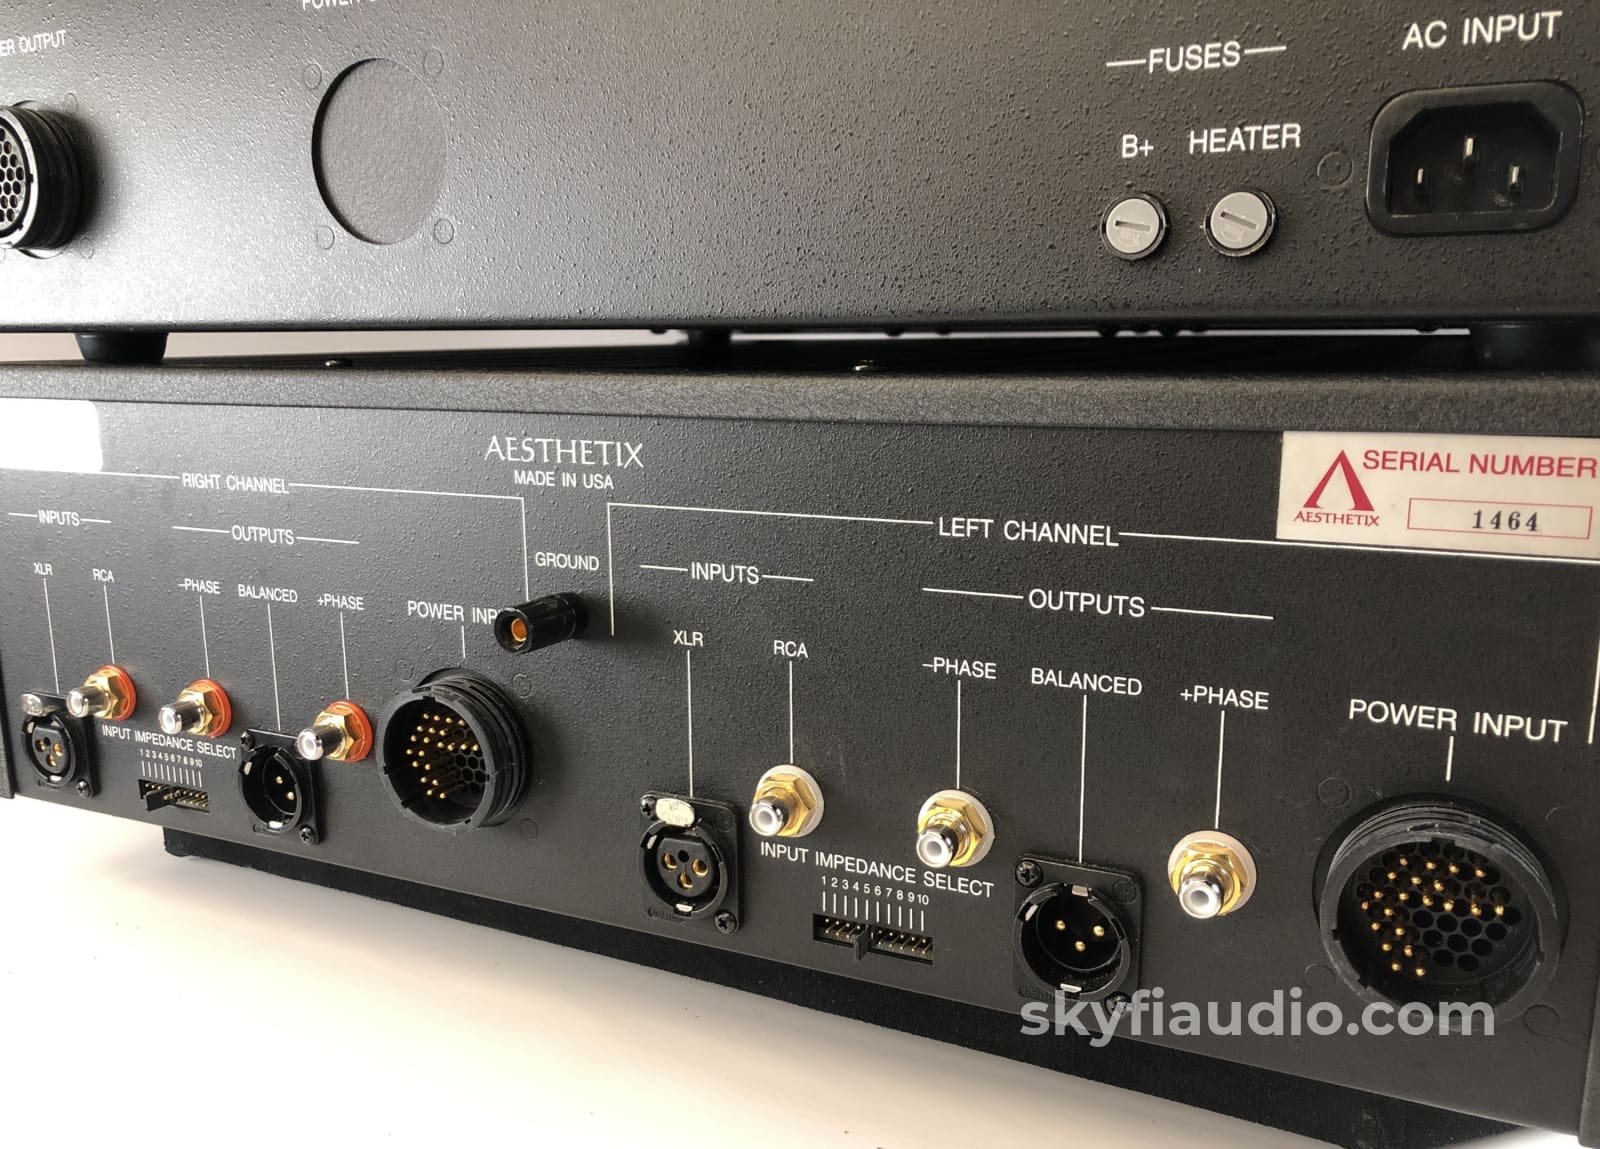 Aesthetix Io Signature All-Tube Phono Stage With Dual Power Supplies Preamplifier